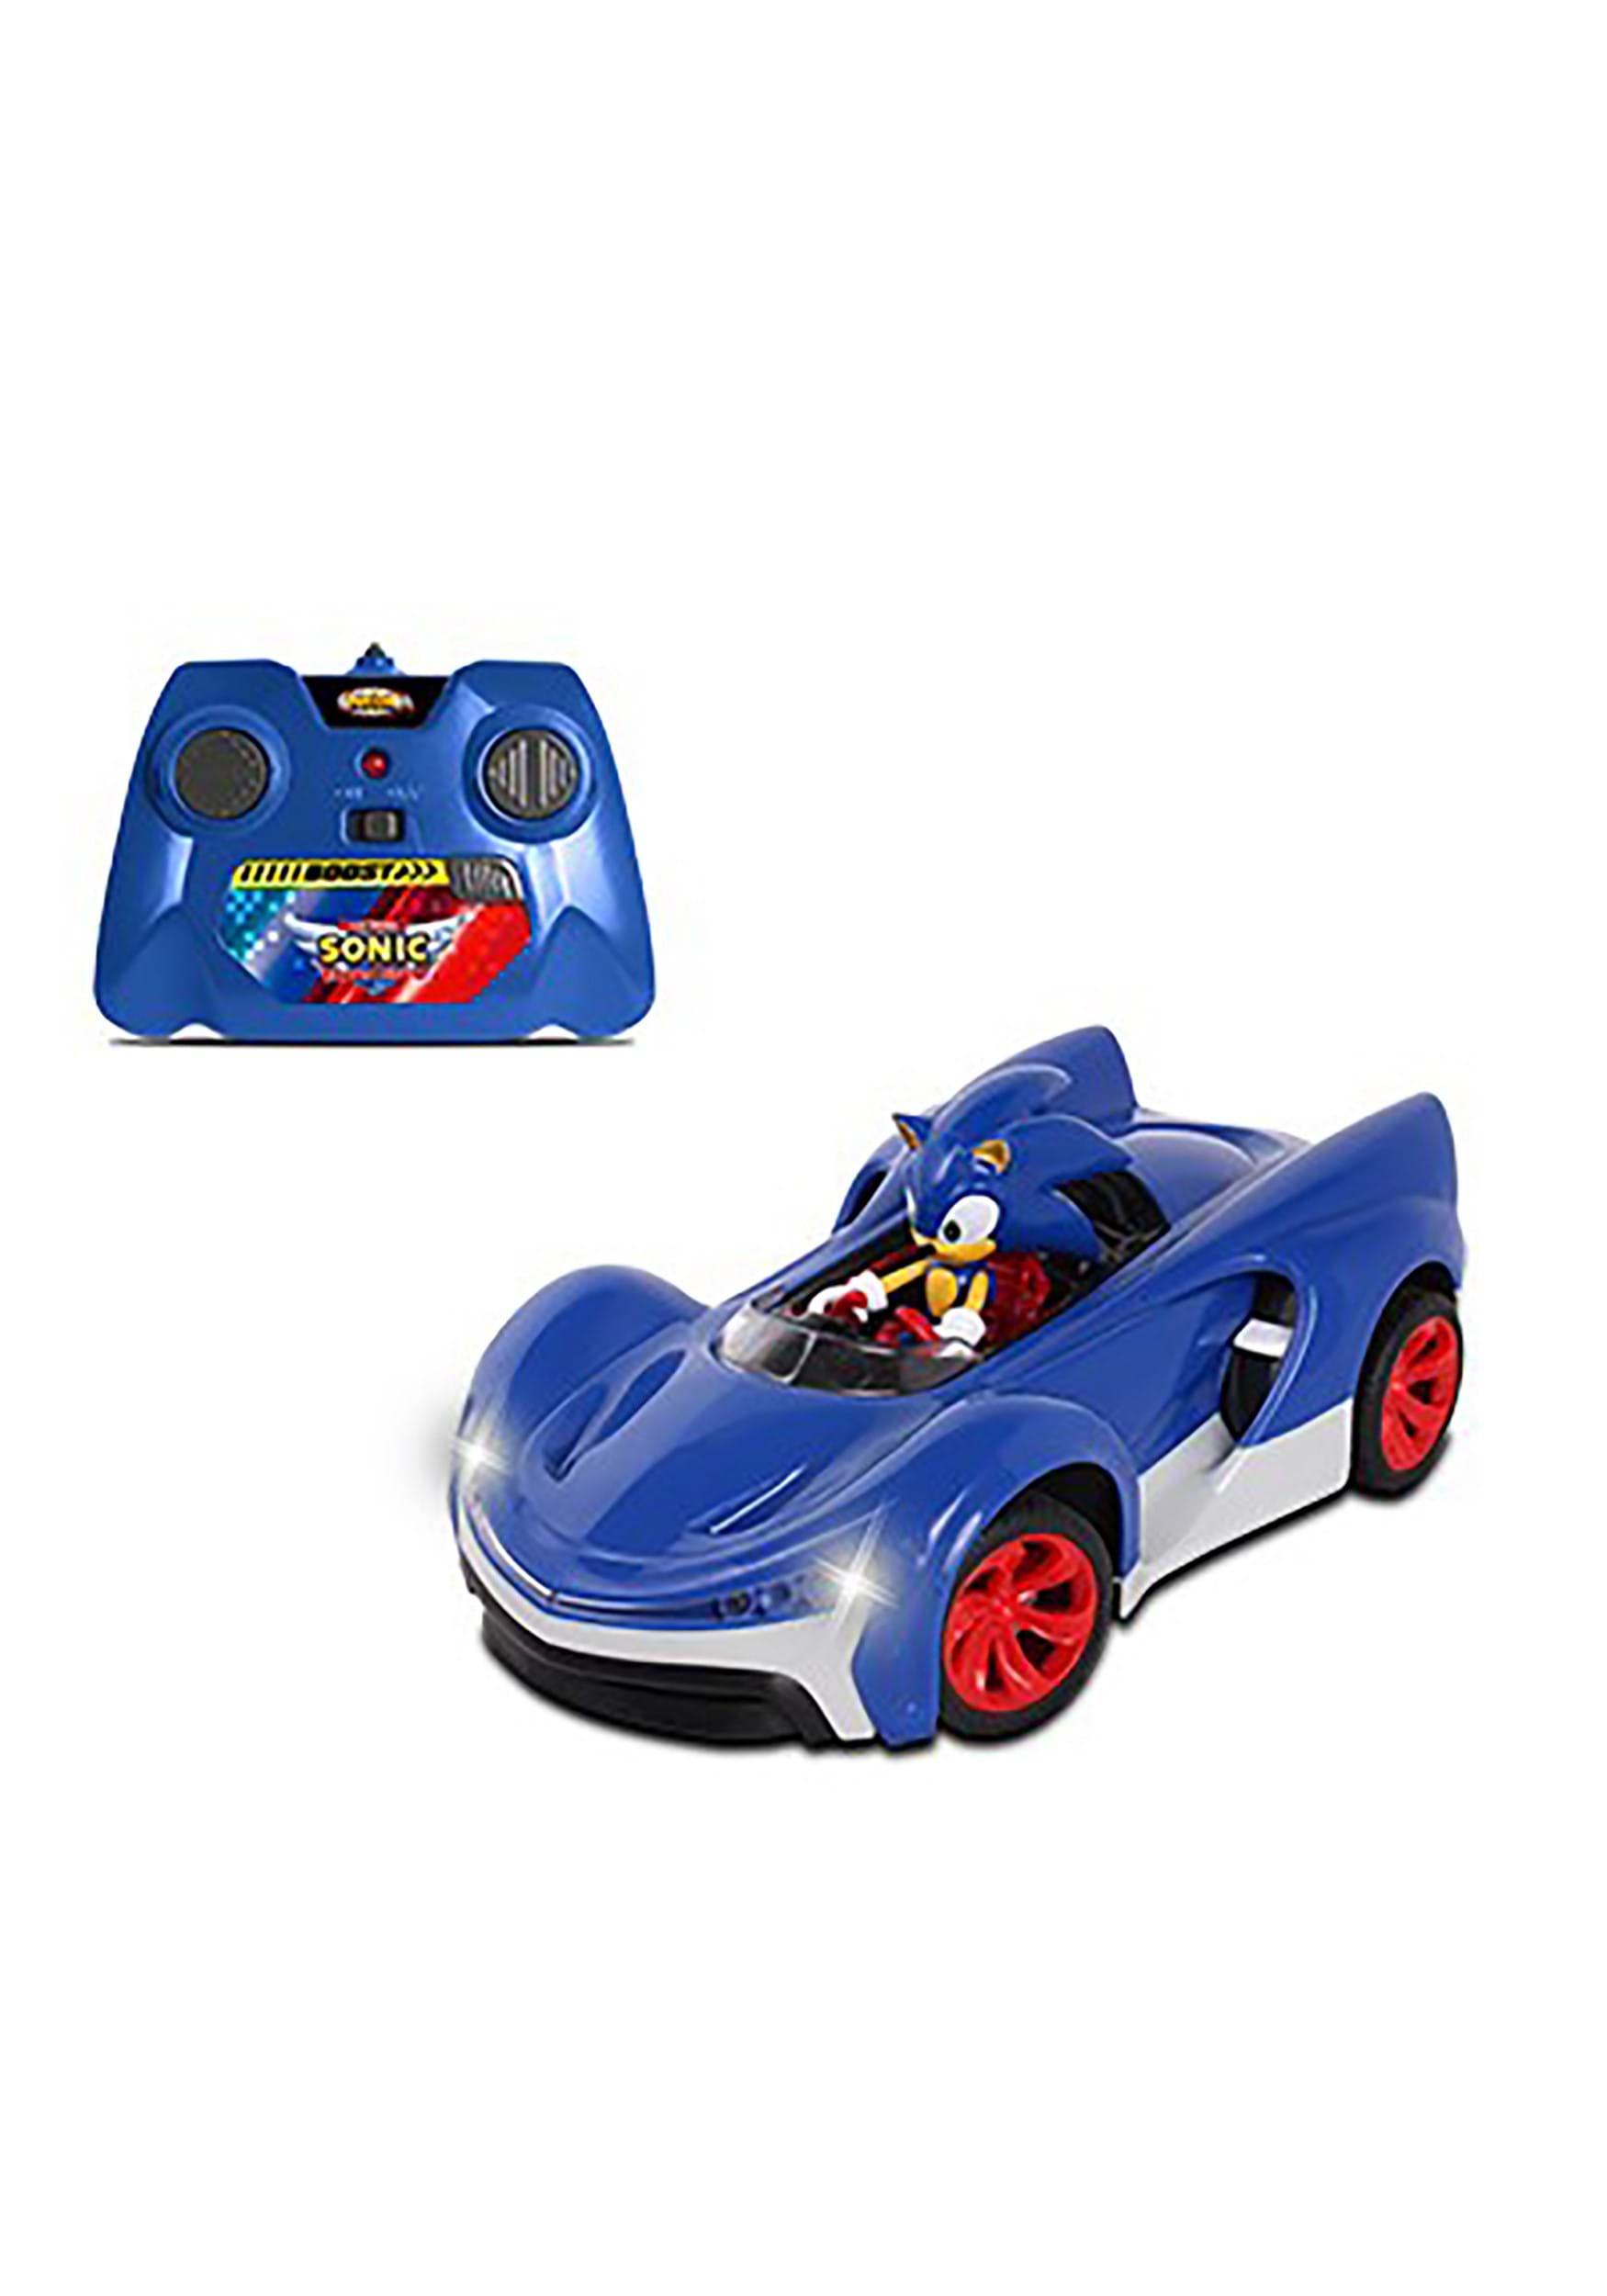 Sonic the Hedgehog R/C Car with Turbo Boost